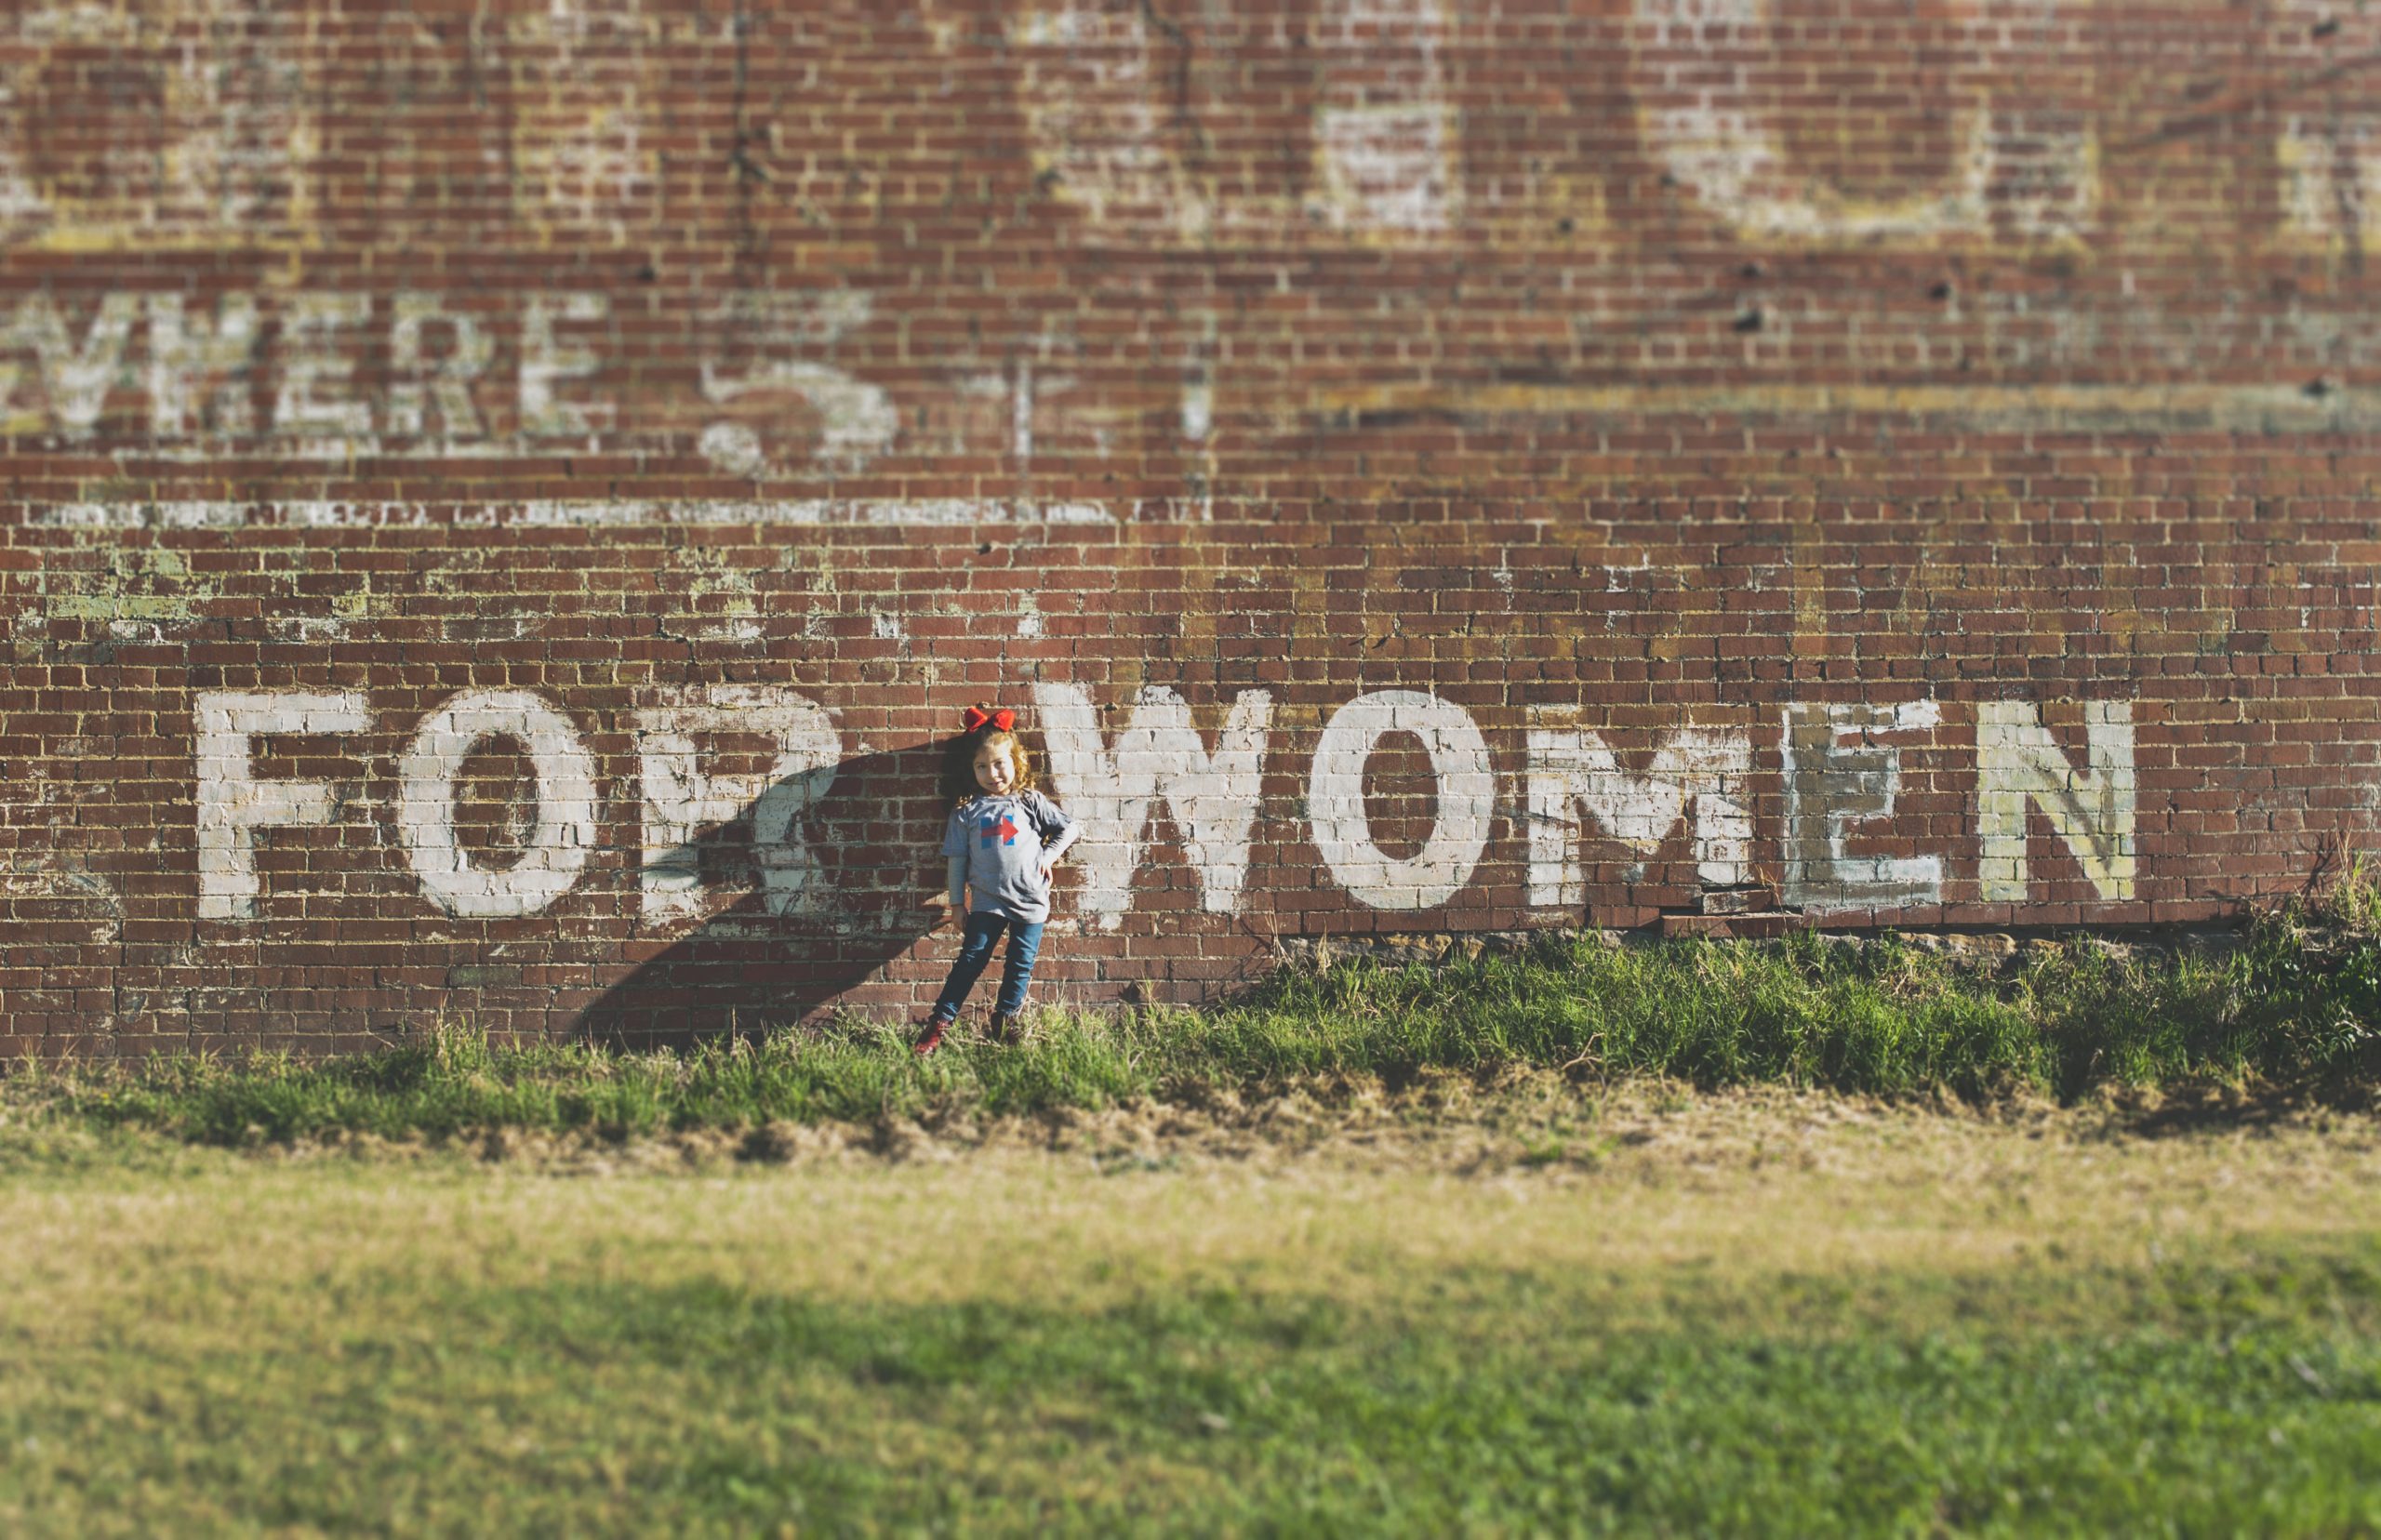 little girl stands in front of a brick wall that says "For Women"